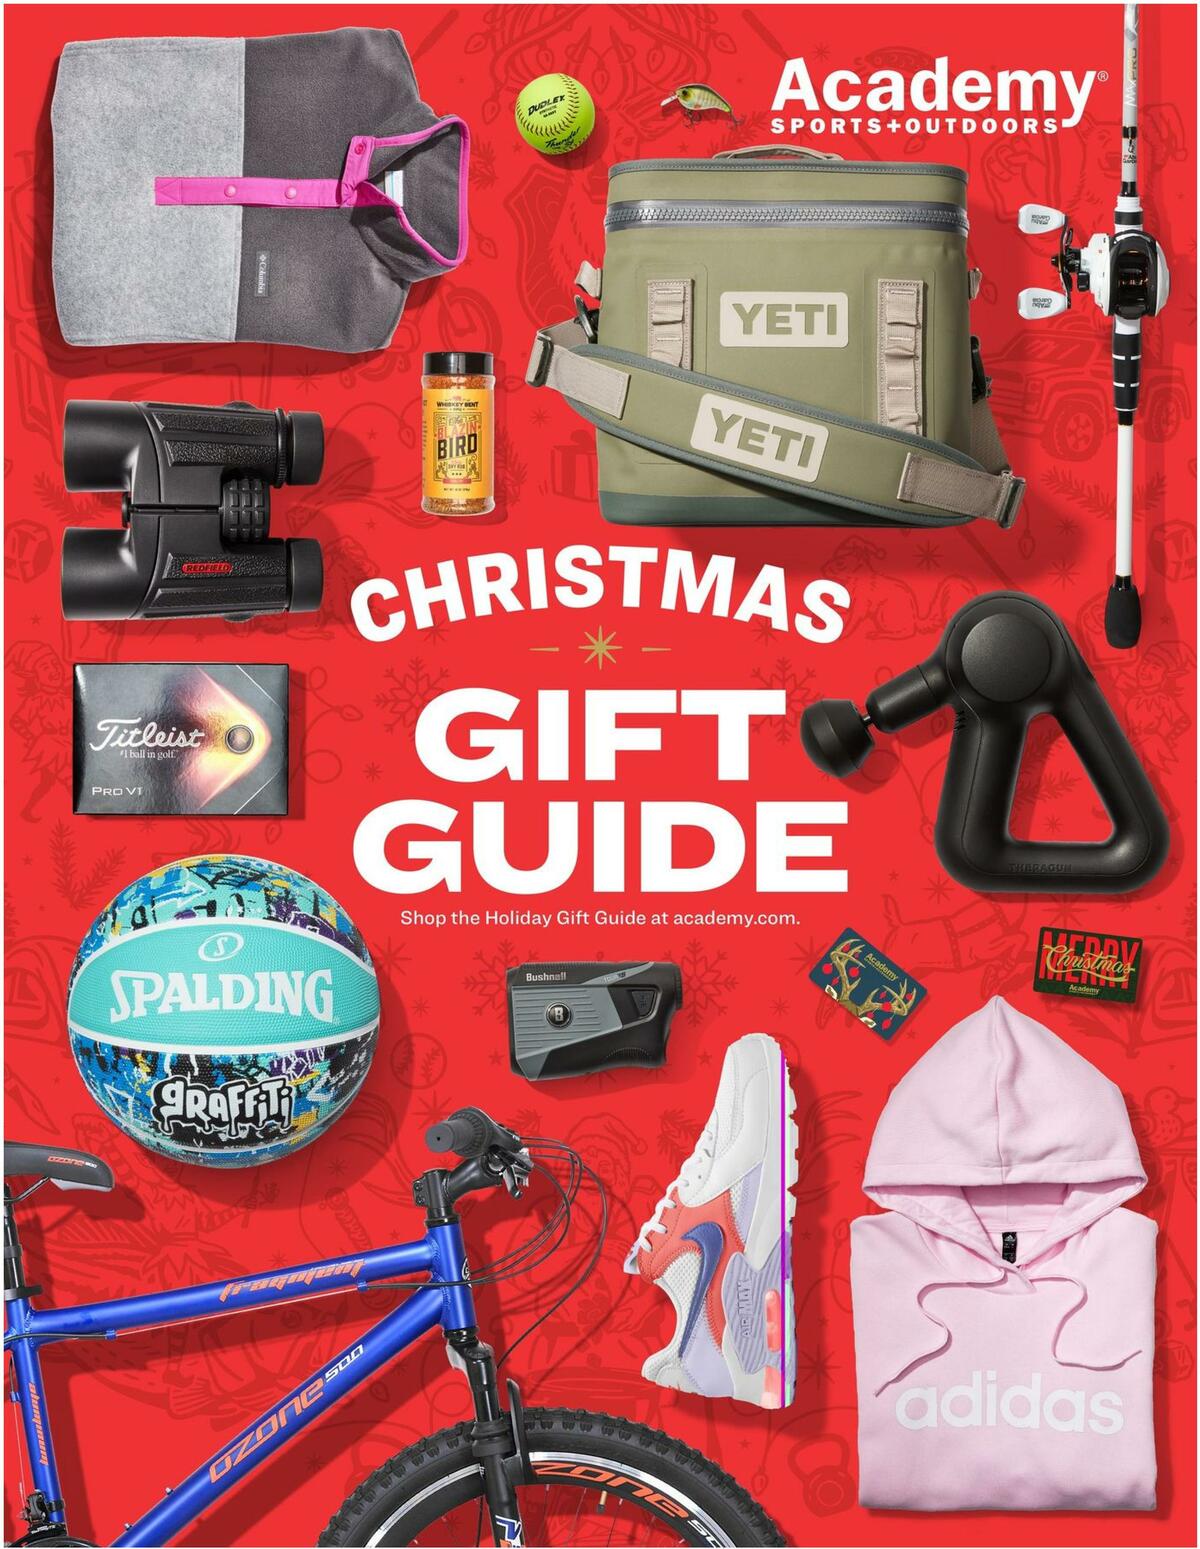 academy-sports-outdoors-christmas-gift-guide-weekly-ads-and-circulars